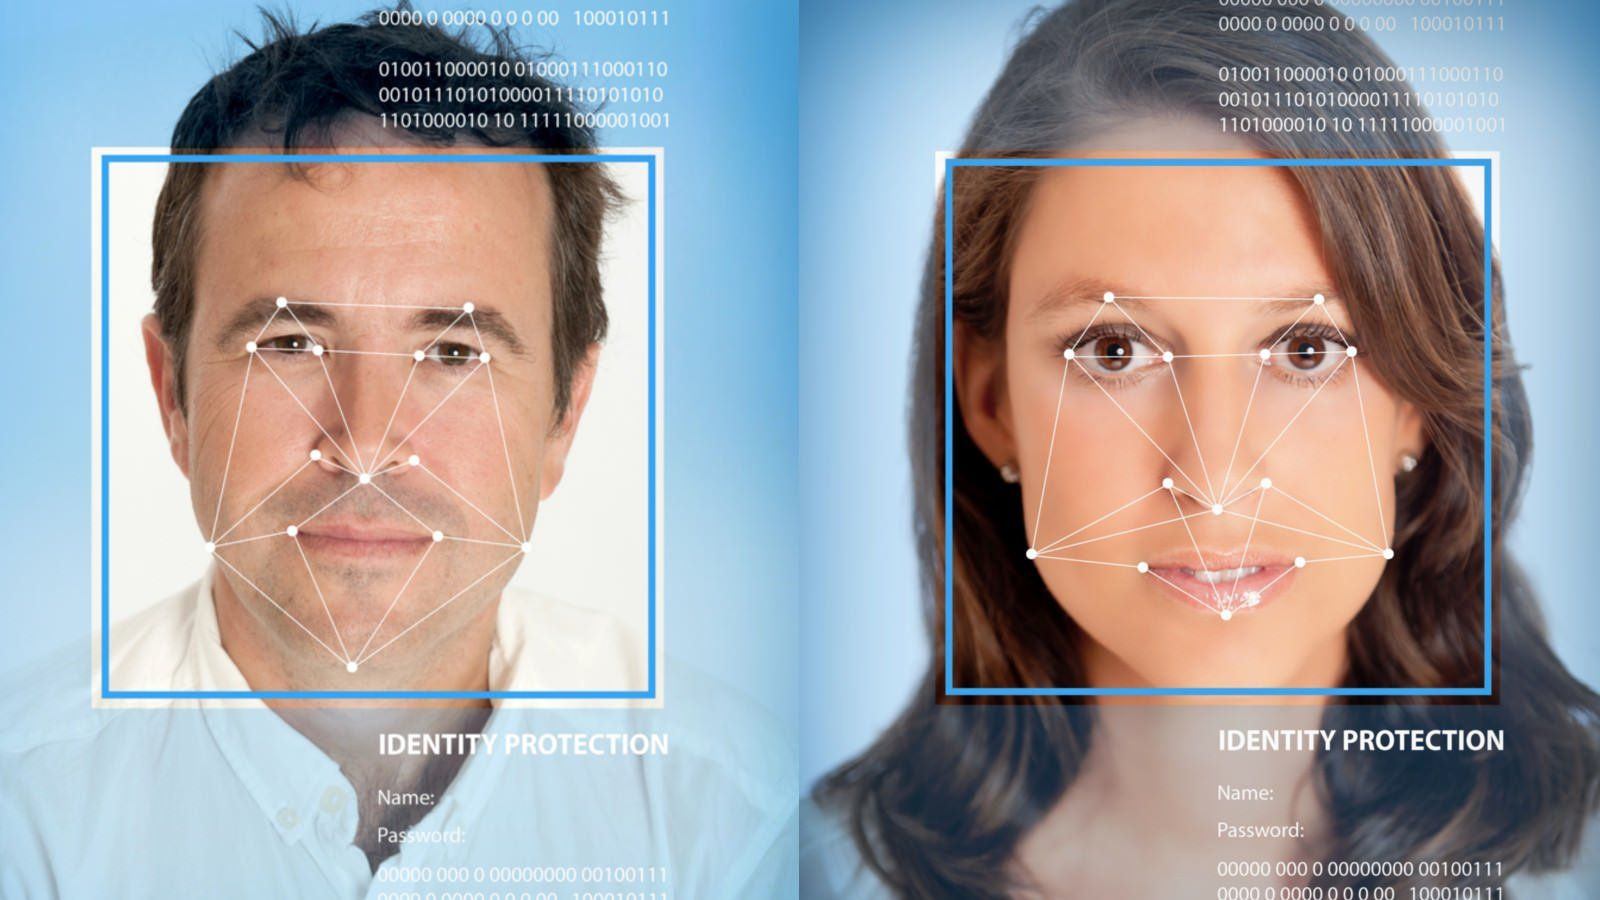 Dell facial recognition software rapidshare